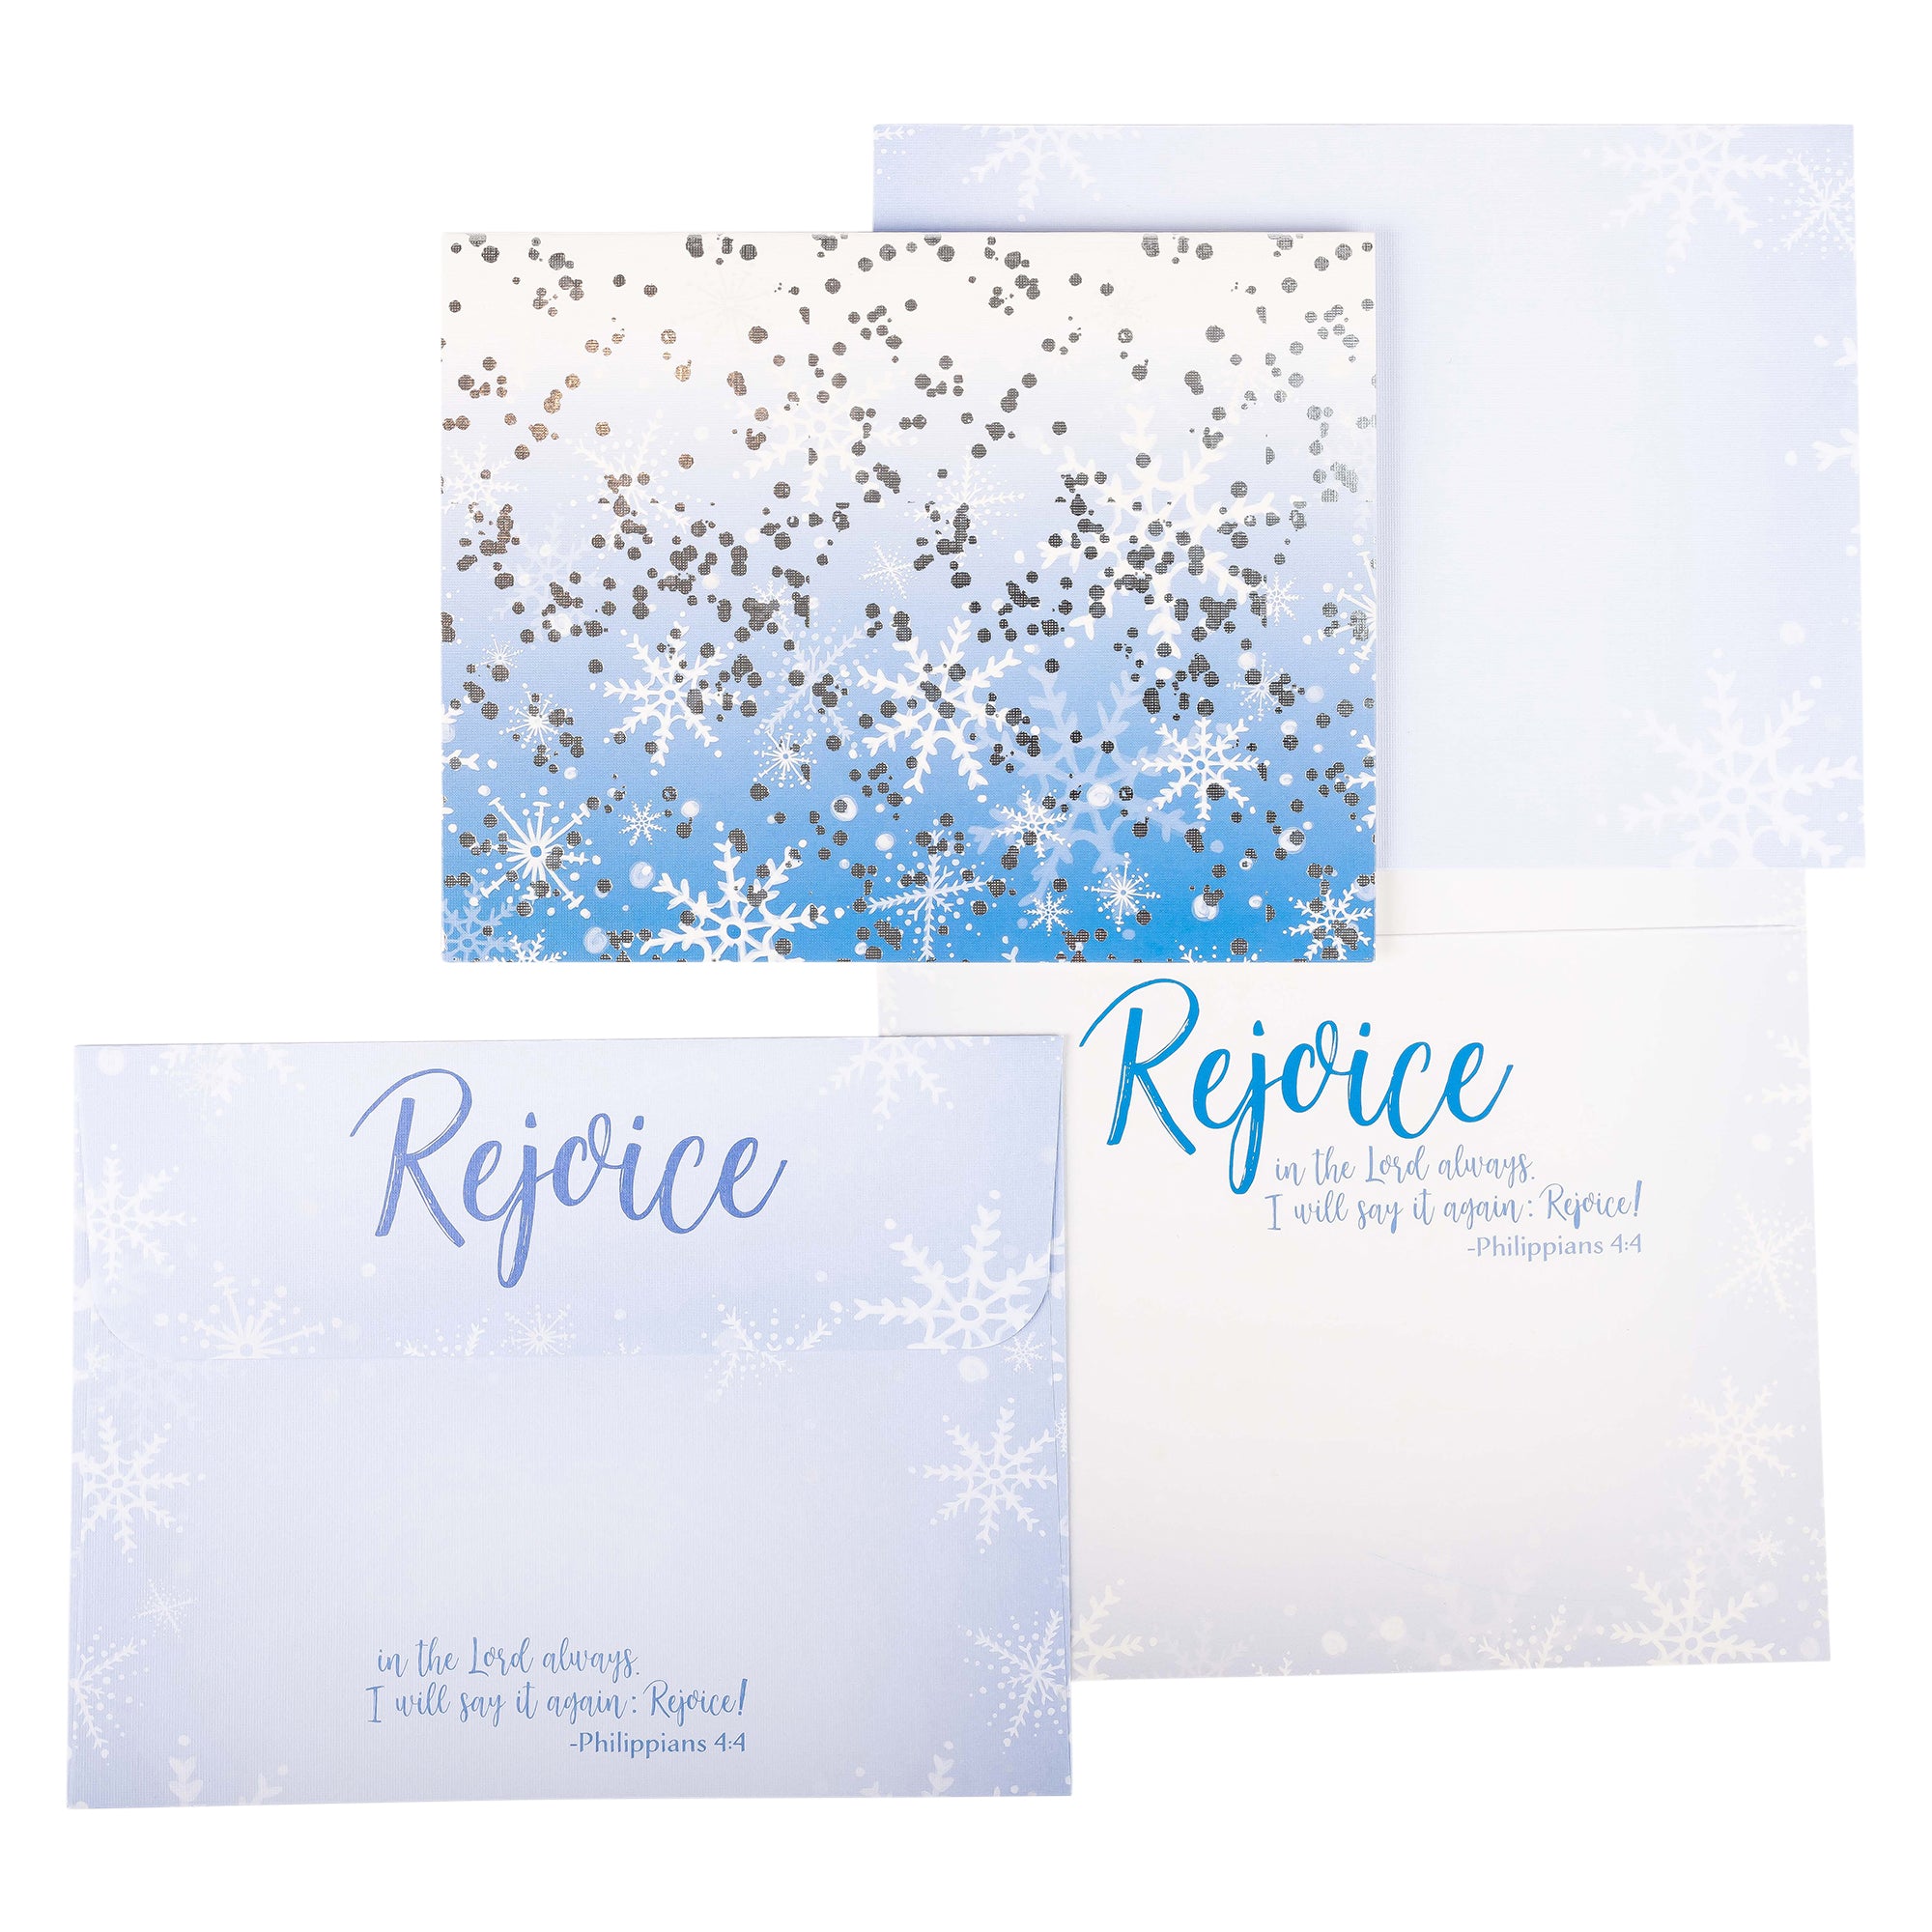 Boxed Christmas Cards: Silver Snowflake